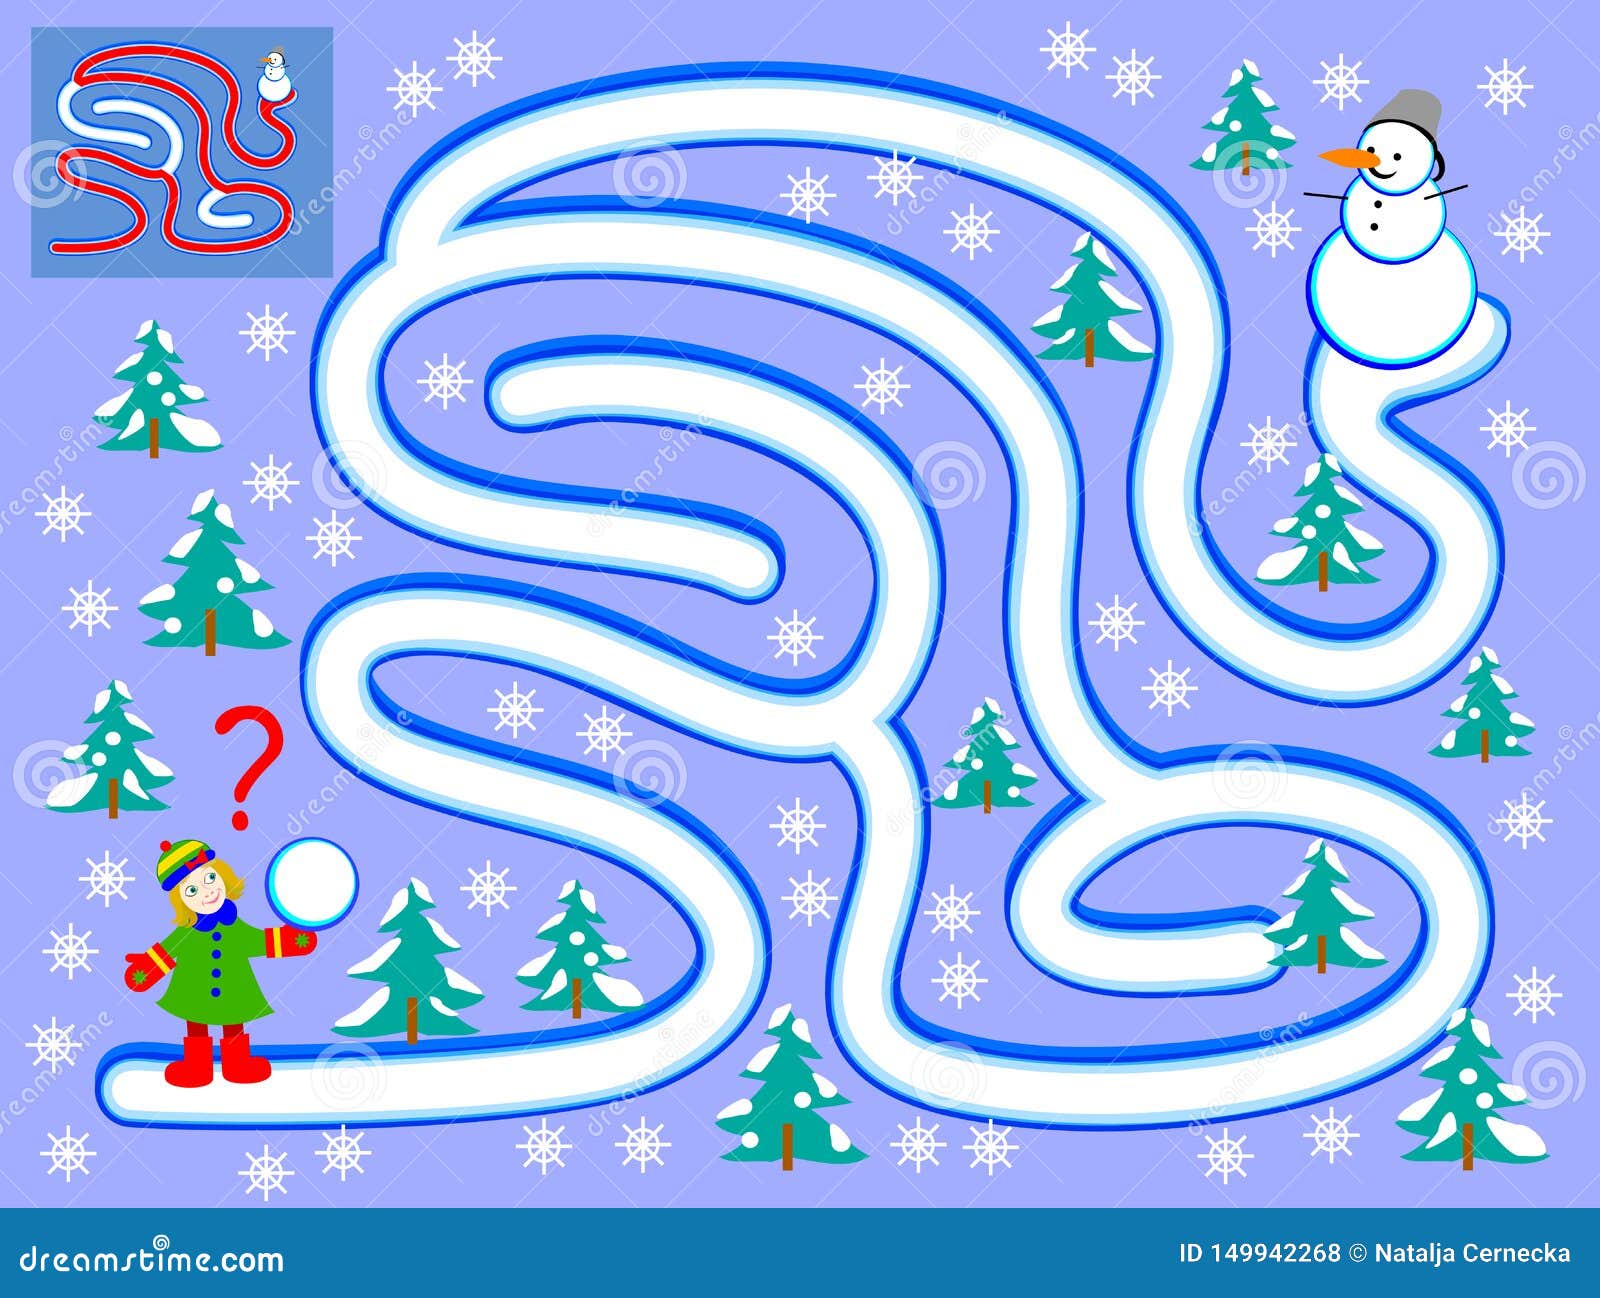 logical puzzle game with labyrinth for little children help the girl find the way in the winter forest till the snowman stock vector illustration of kindergarten pass 149942268